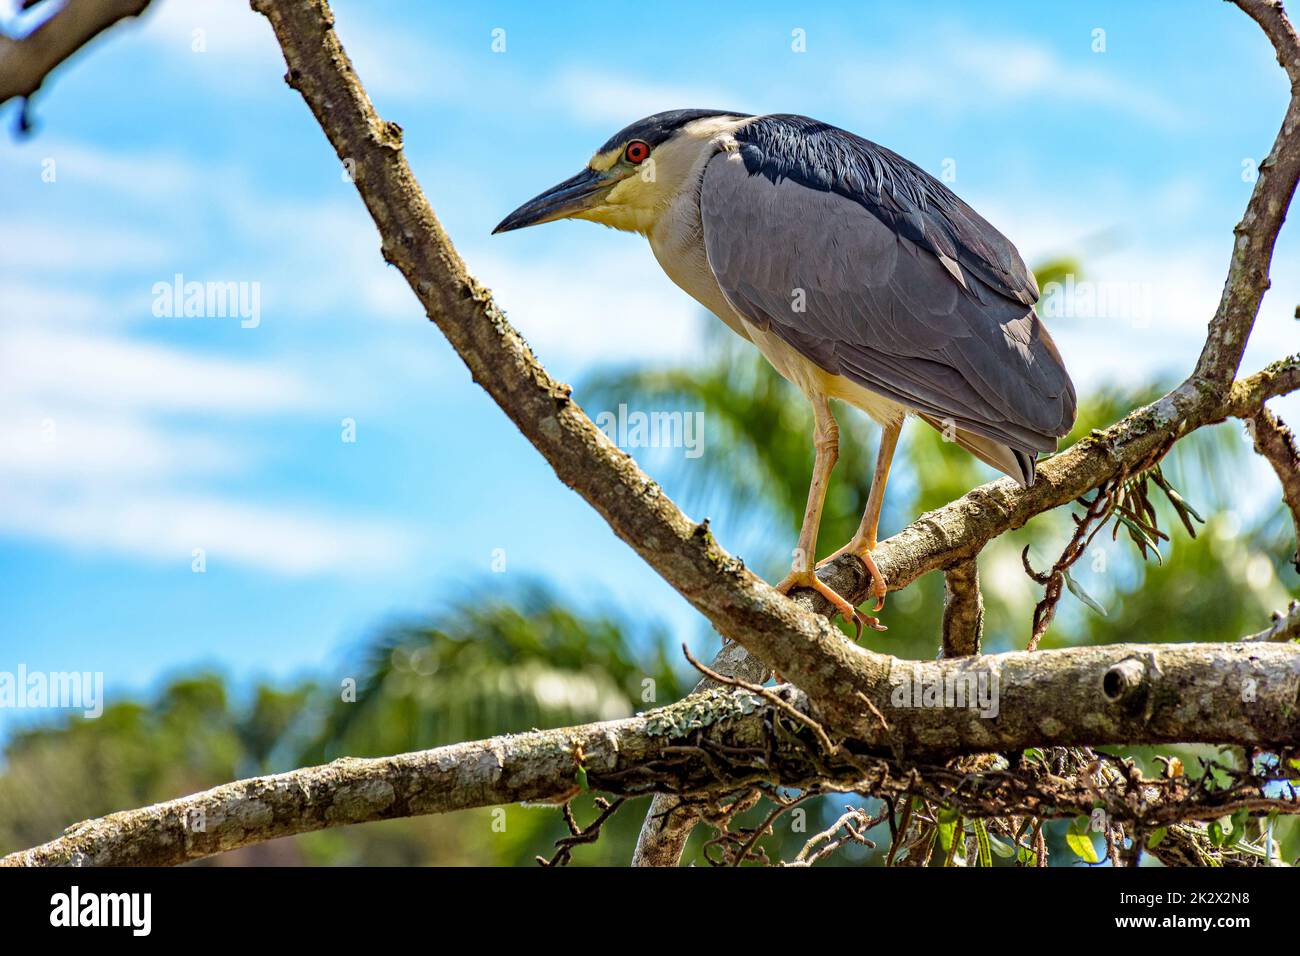 Black-crowned Night-Heron perched on a tree Stock Photo